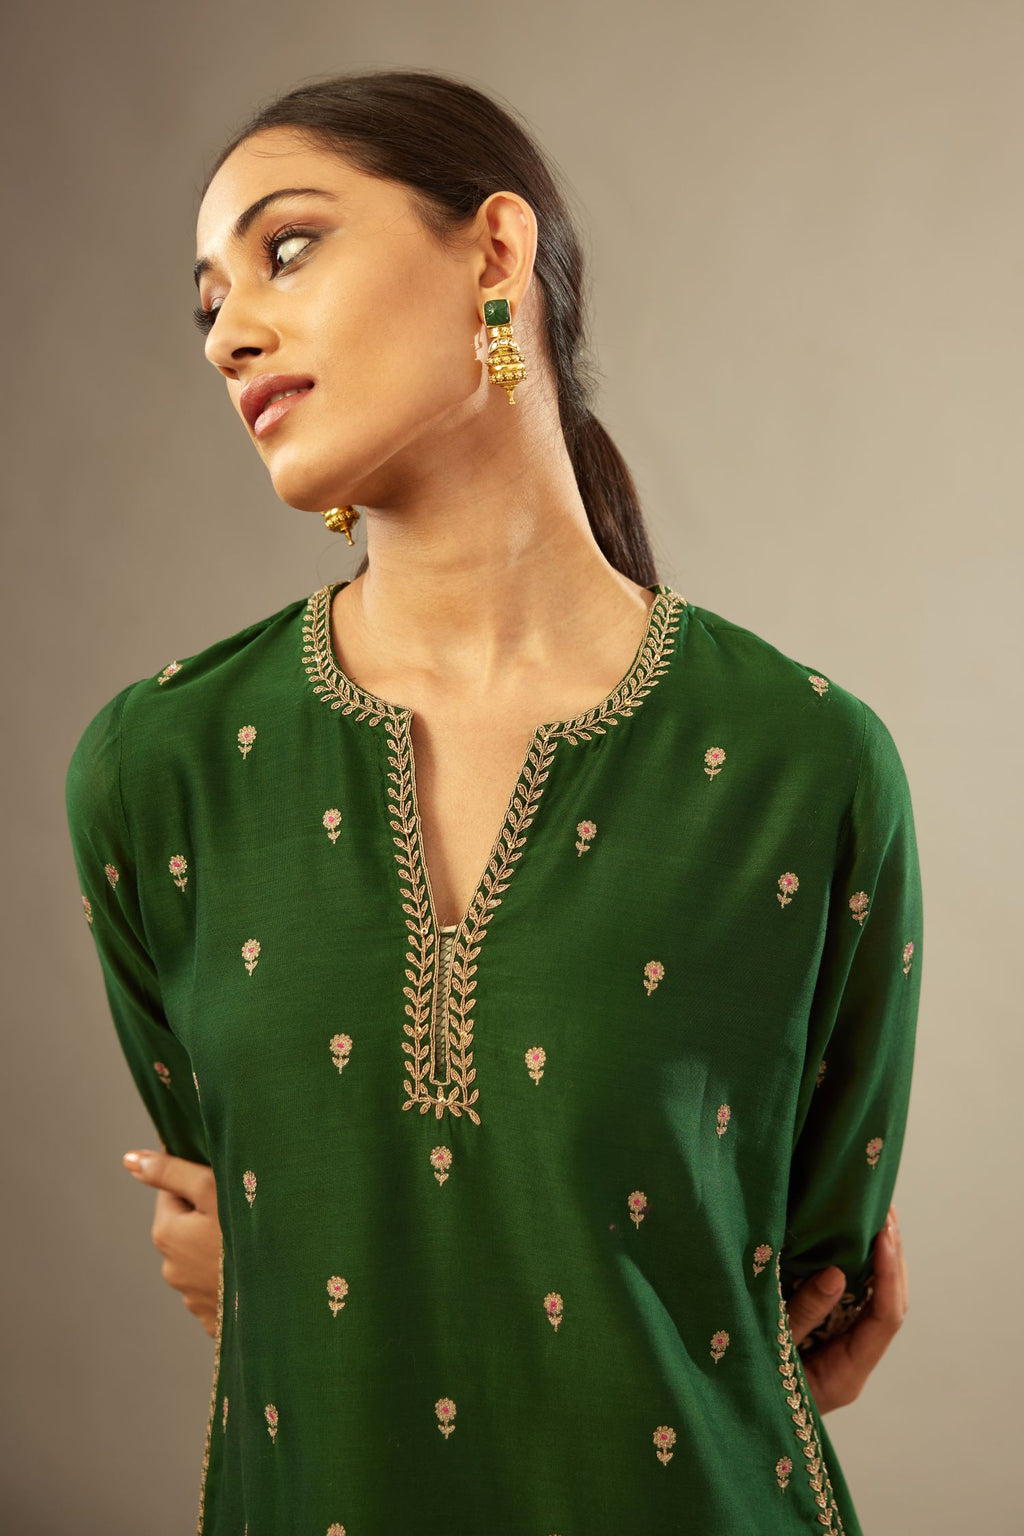 Green silk chanderi straight kurta set with gold dori embroidery, detailed with small aari embroidery buties all-over.